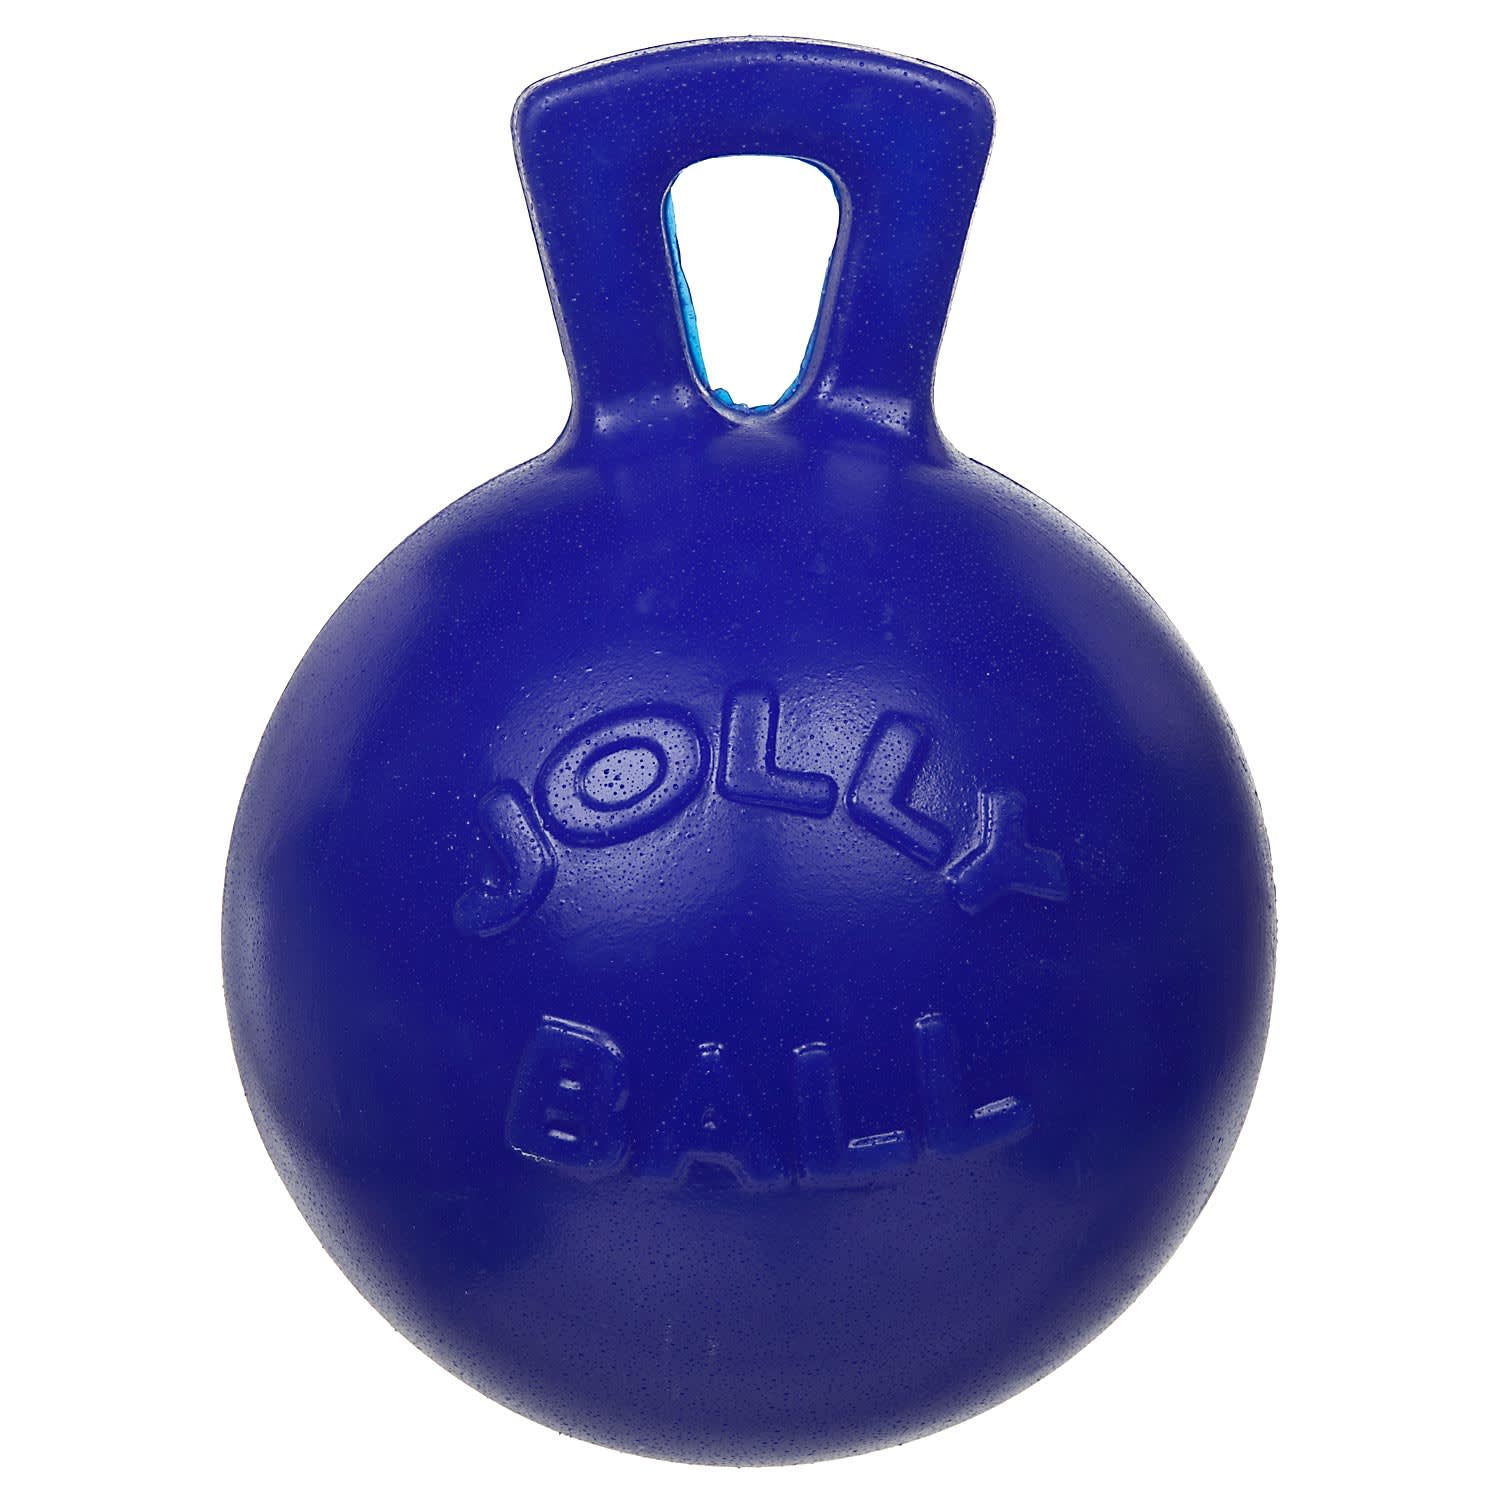 ball tossing toy for dogs